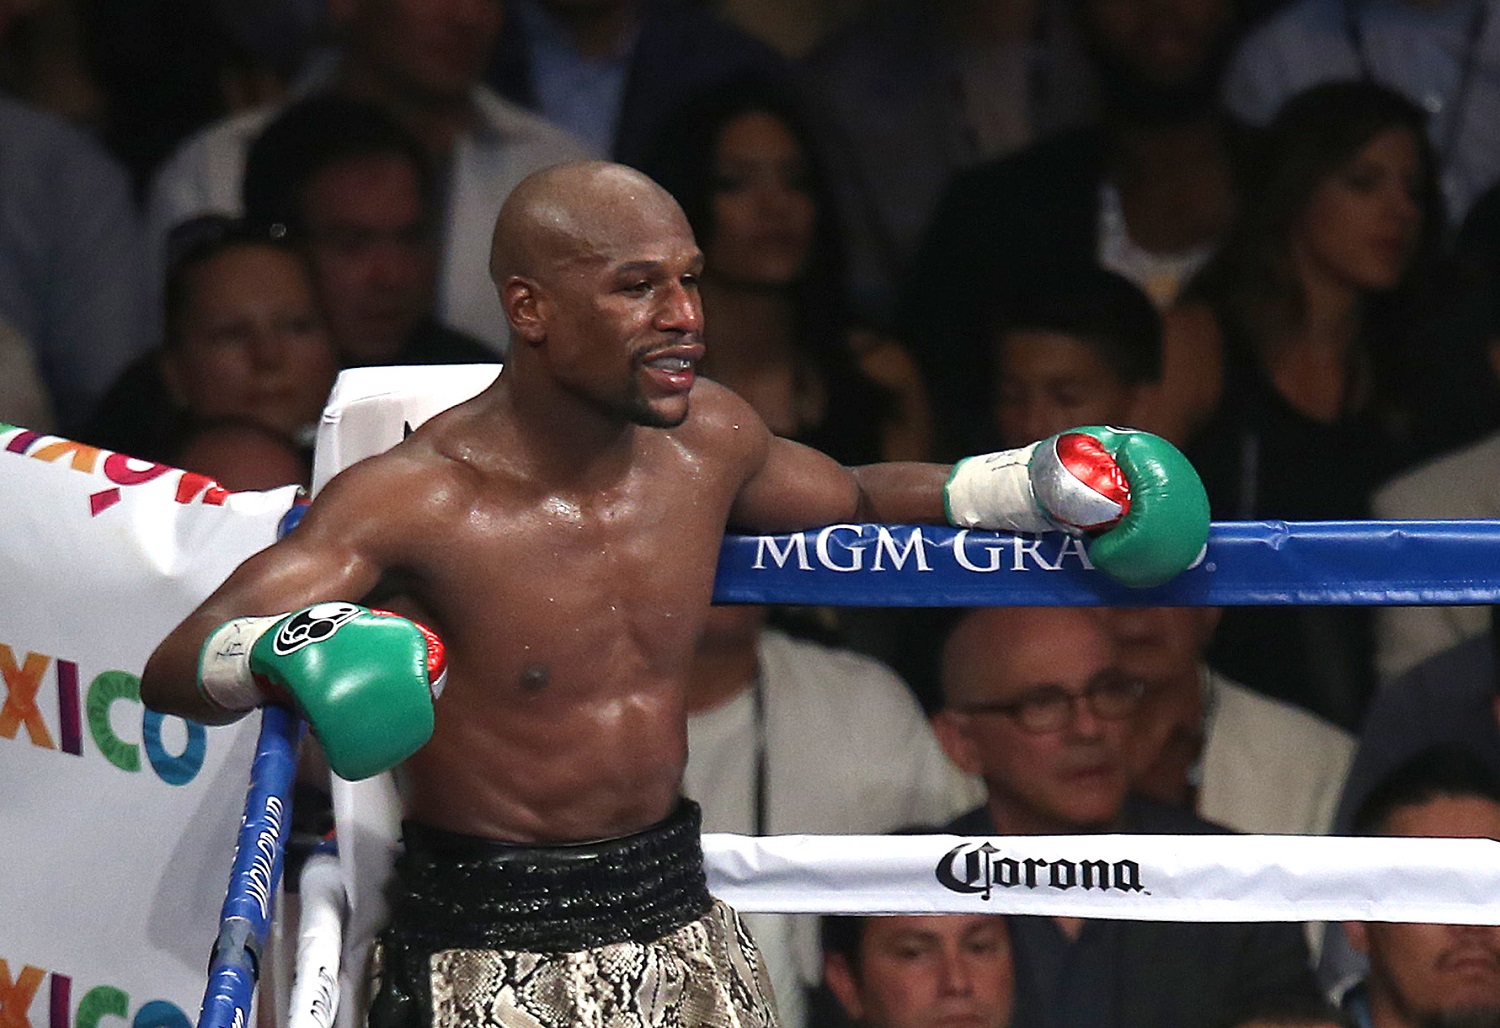 Floyd Mayweather Jr. waits in a neutral corner after throwing a low blow during his welterweight title fight against Marcos Maidana on Sept. 13, 2014.